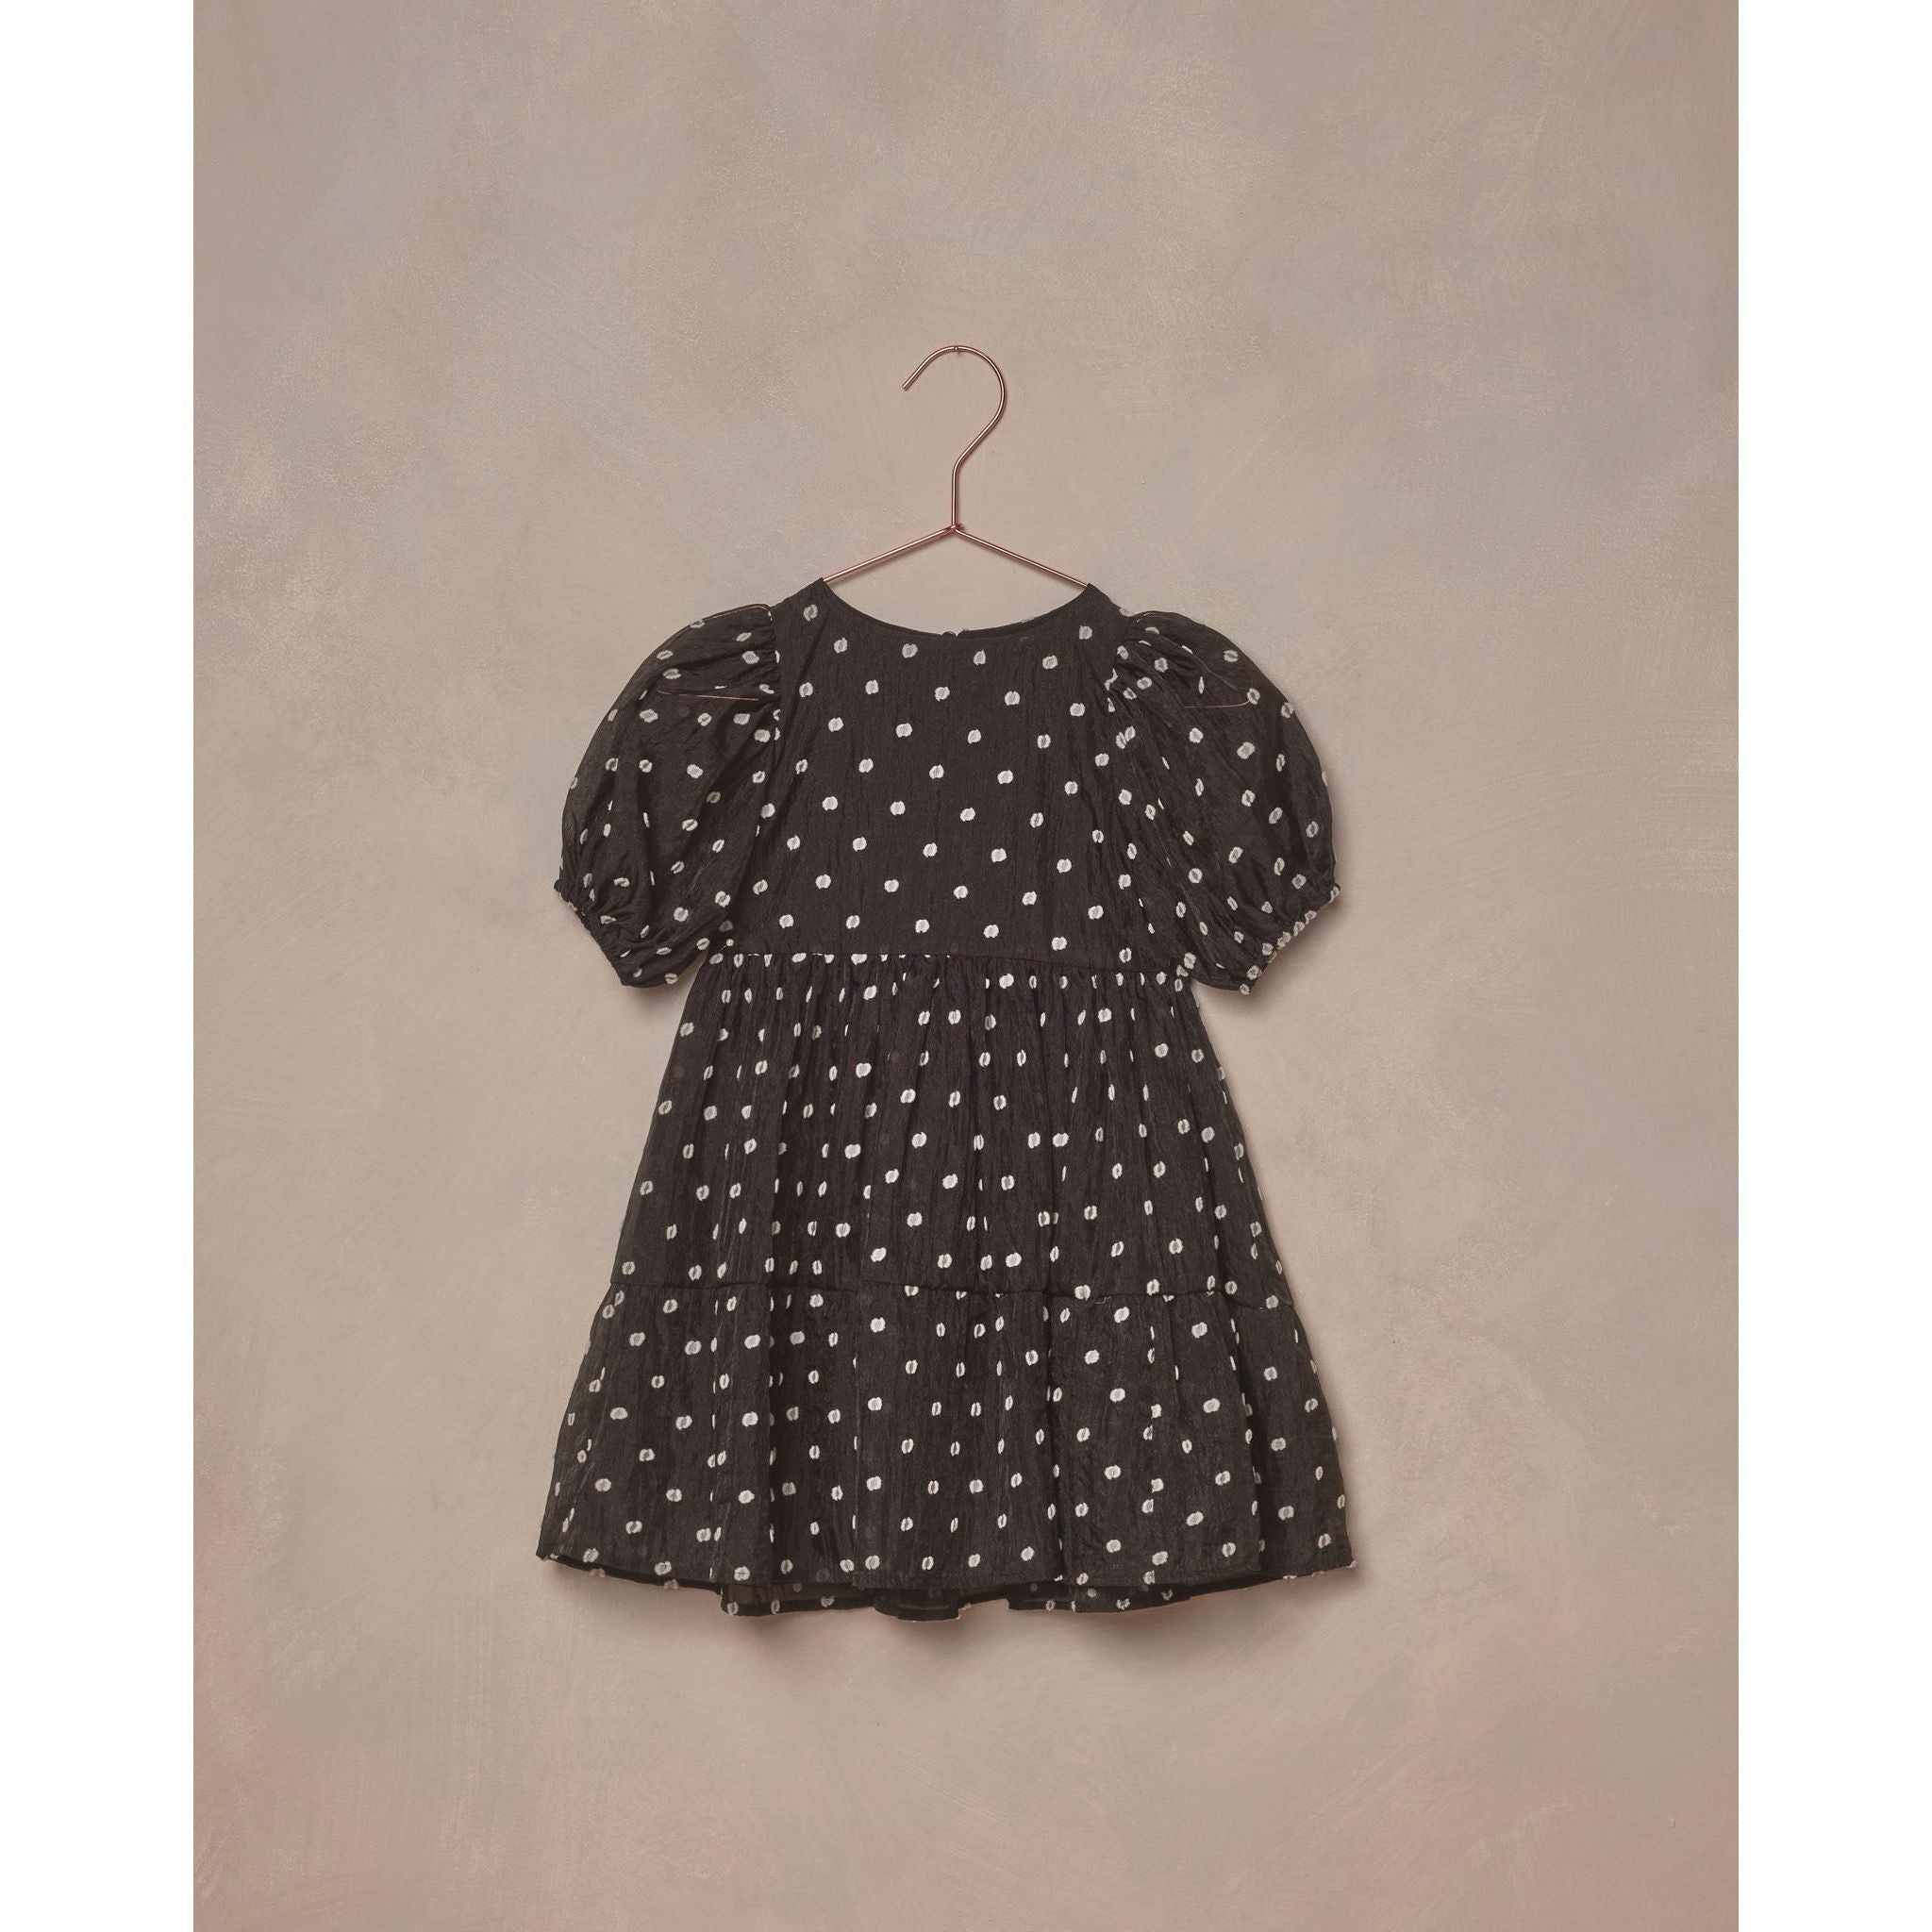 black midi dress with layered tiered skirt, full puffed sleeves, and a delicate button-back closure and white polka dots